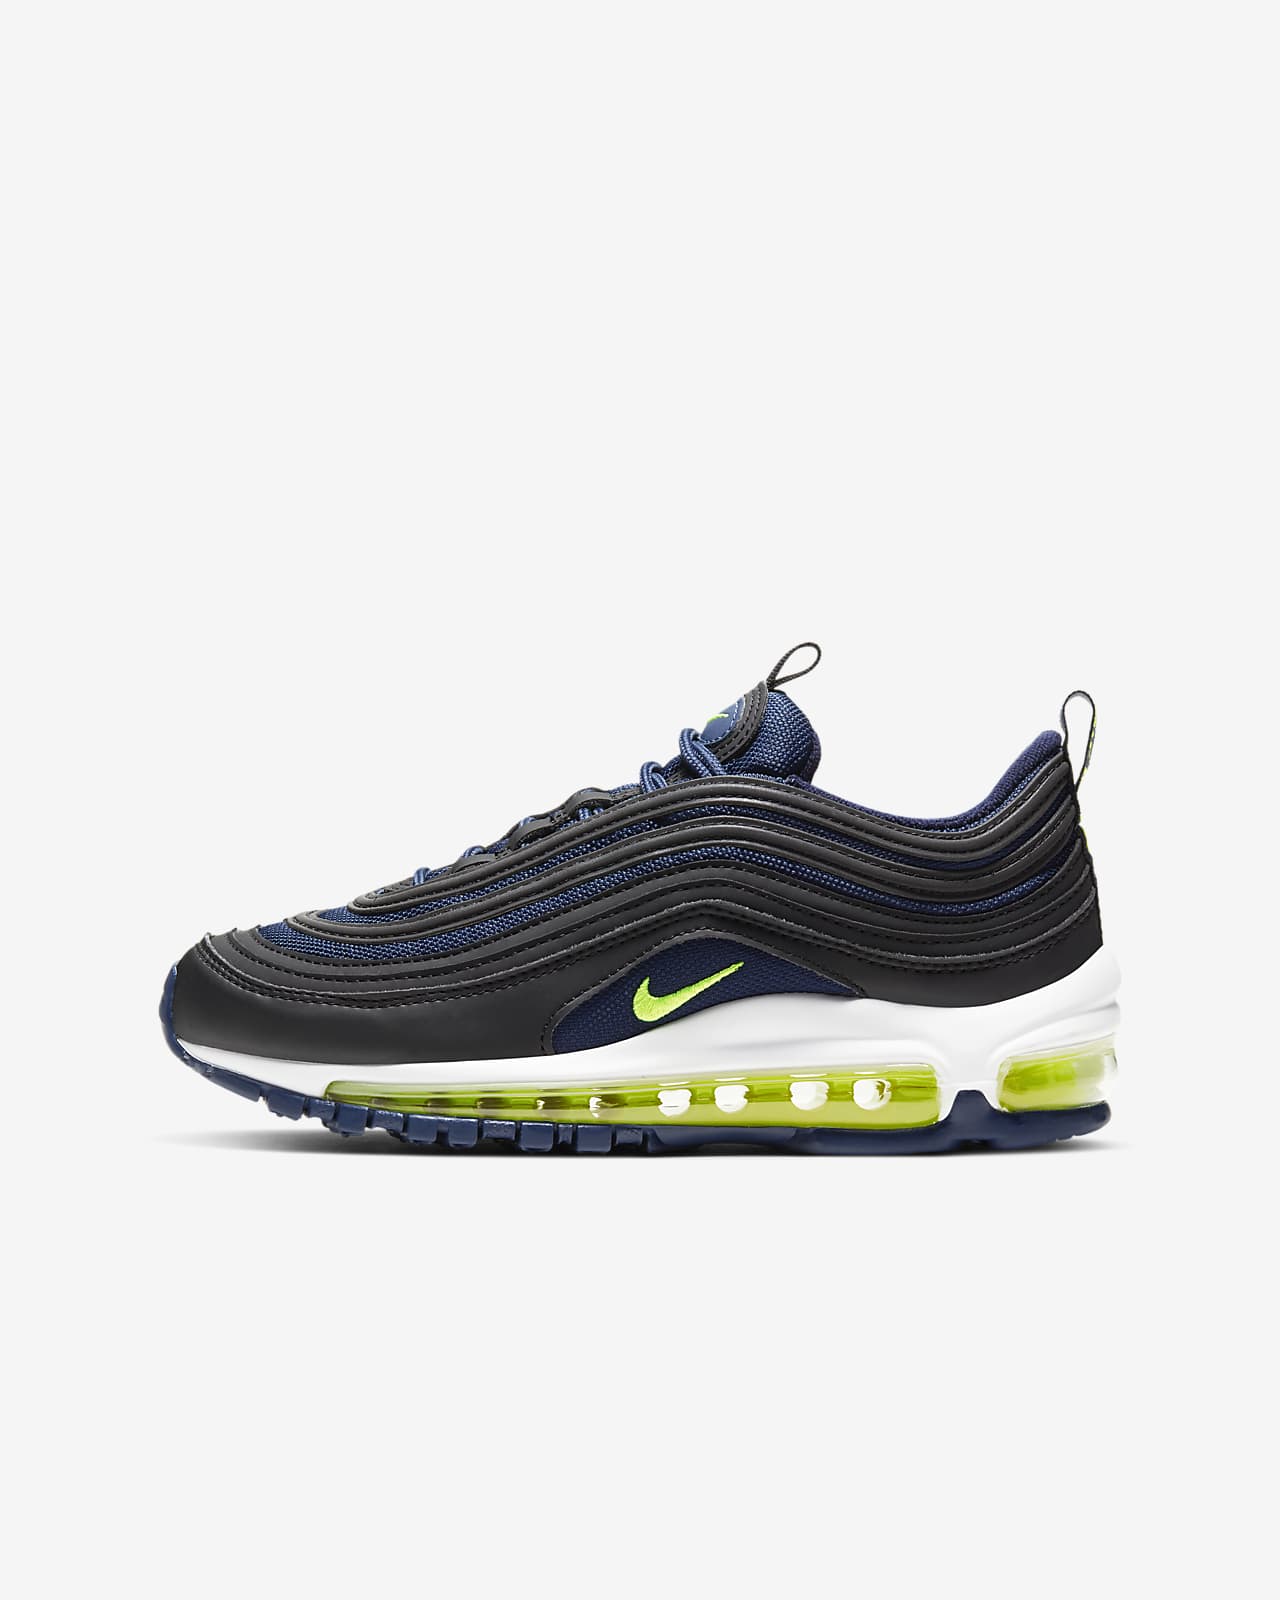 nike air max 97 good for running